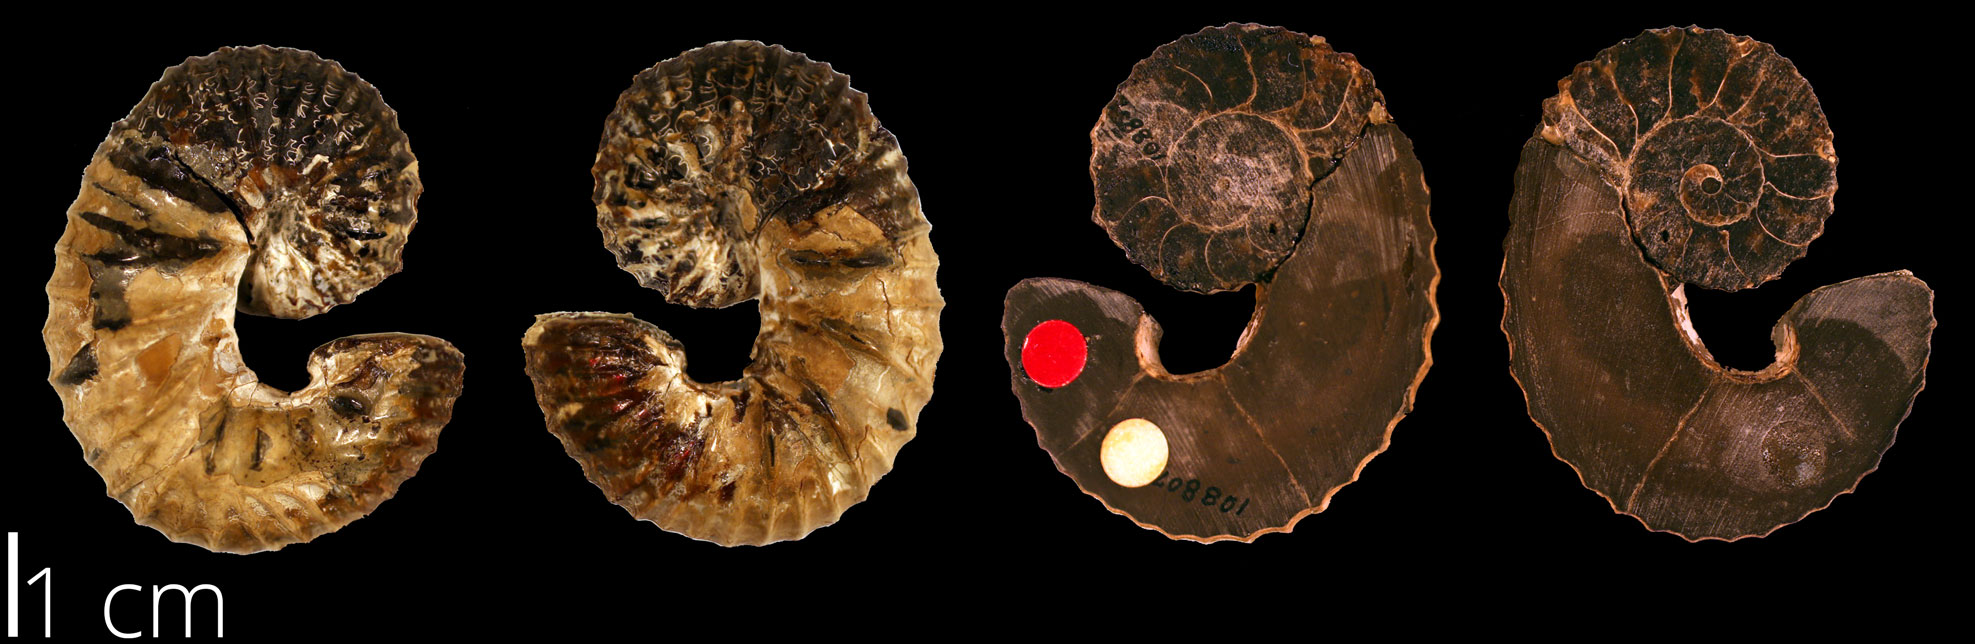 Photos showing outer views and long sections of the shell of a loosely coiled ammonite.